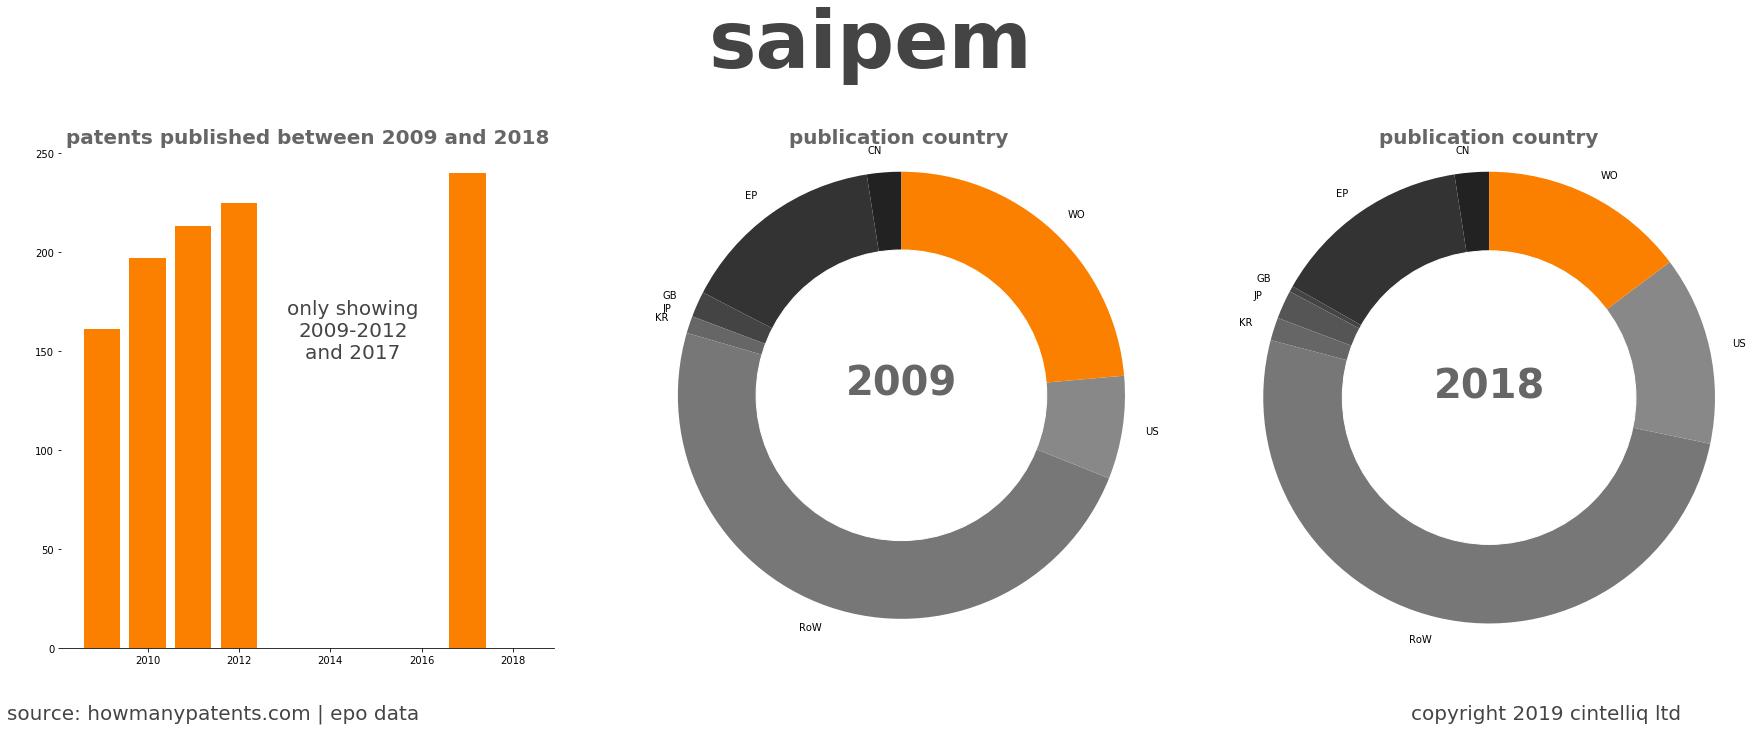 summary of patents for Saipem